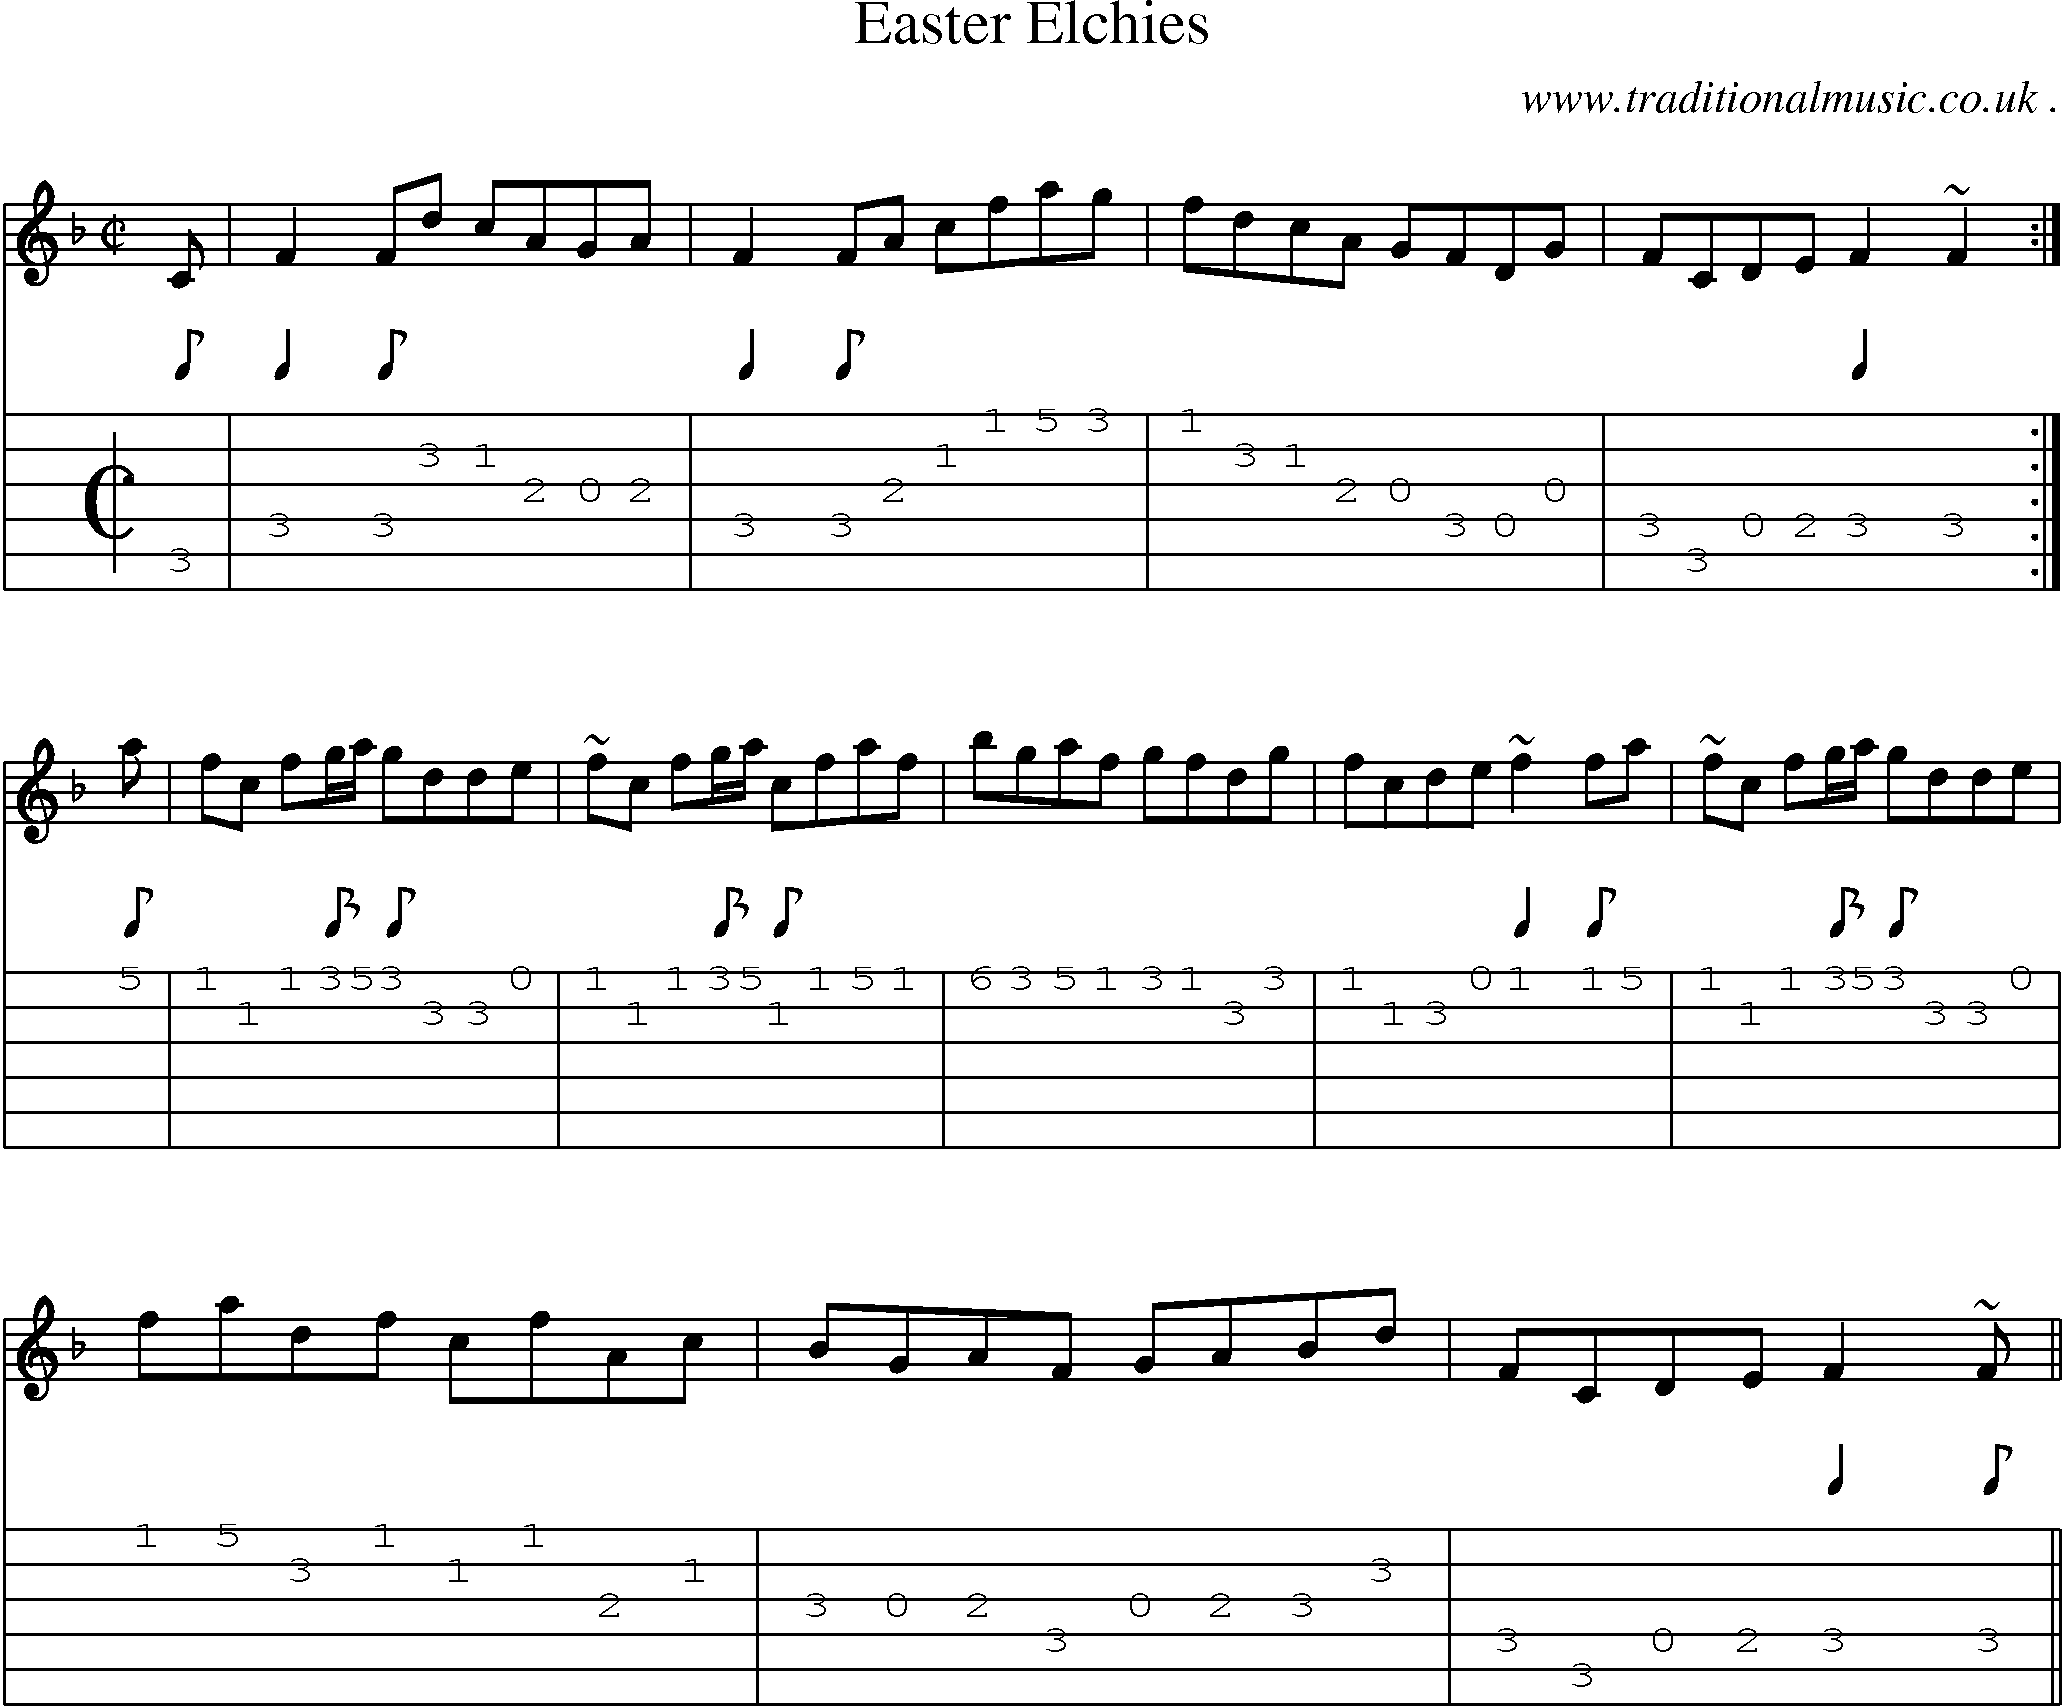 Sheet-music  score, Chords and Guitar Tabs for Easter Elchies